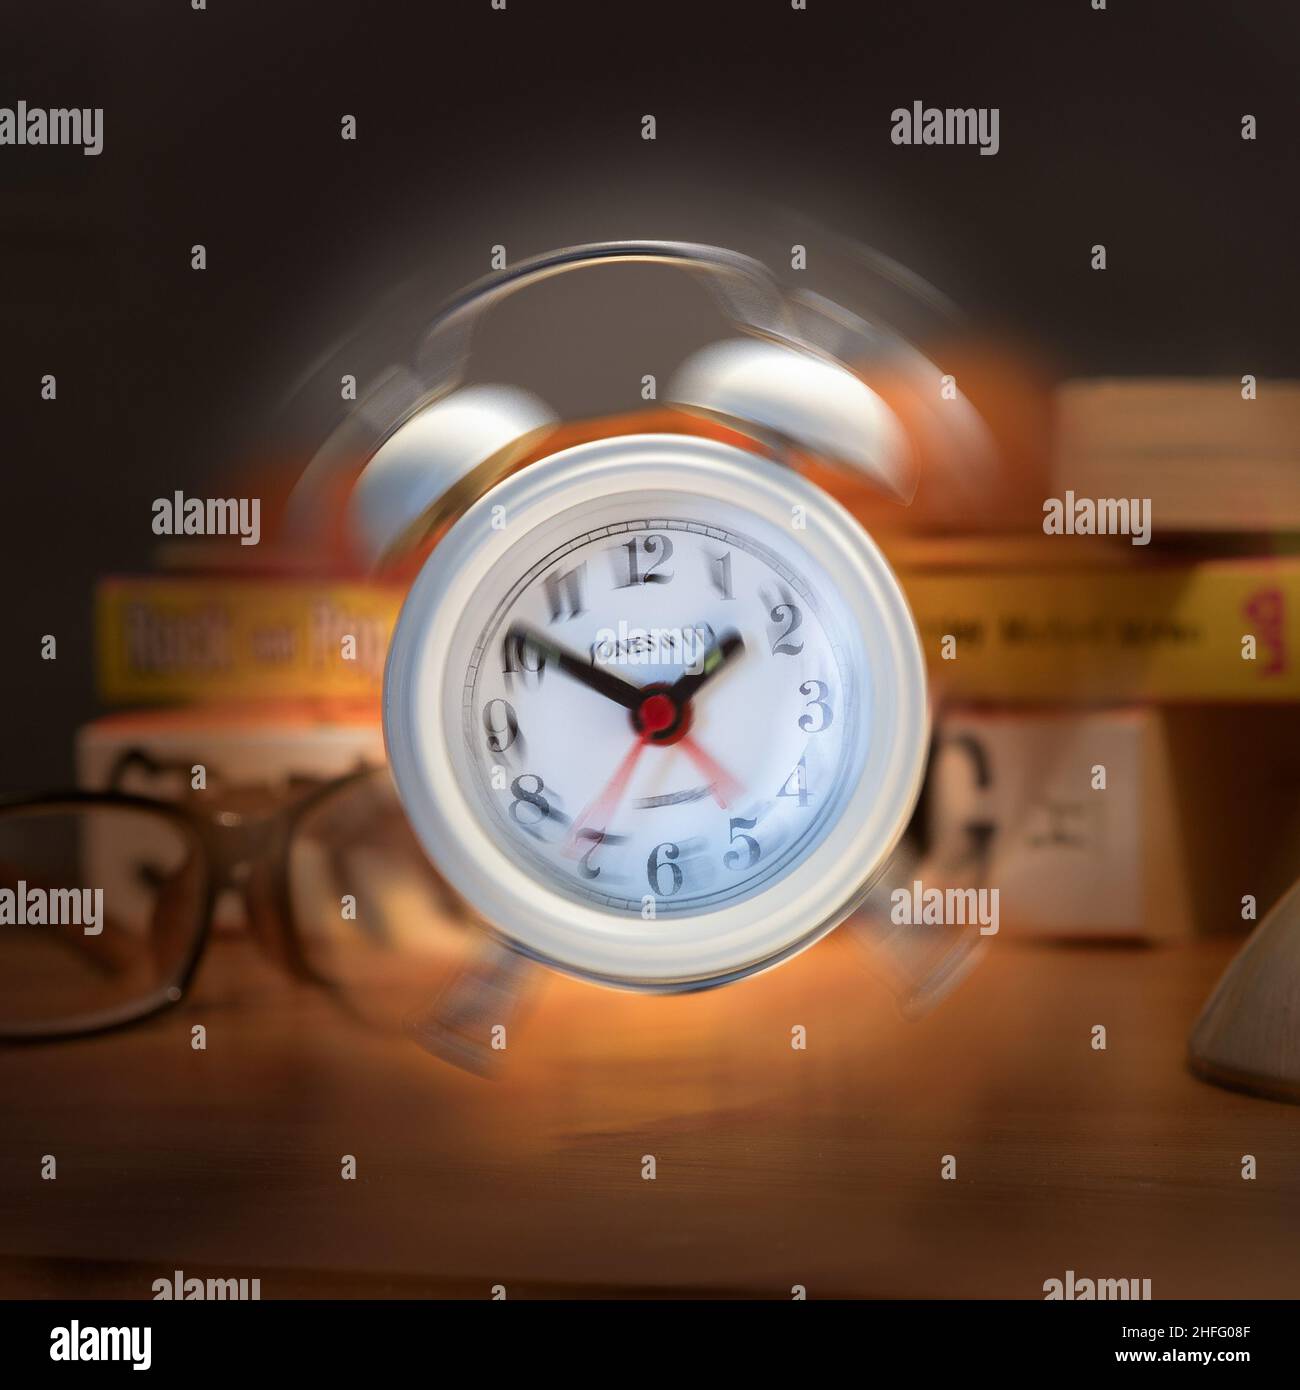 ringing alarm clock on a bedside table Stock Photo